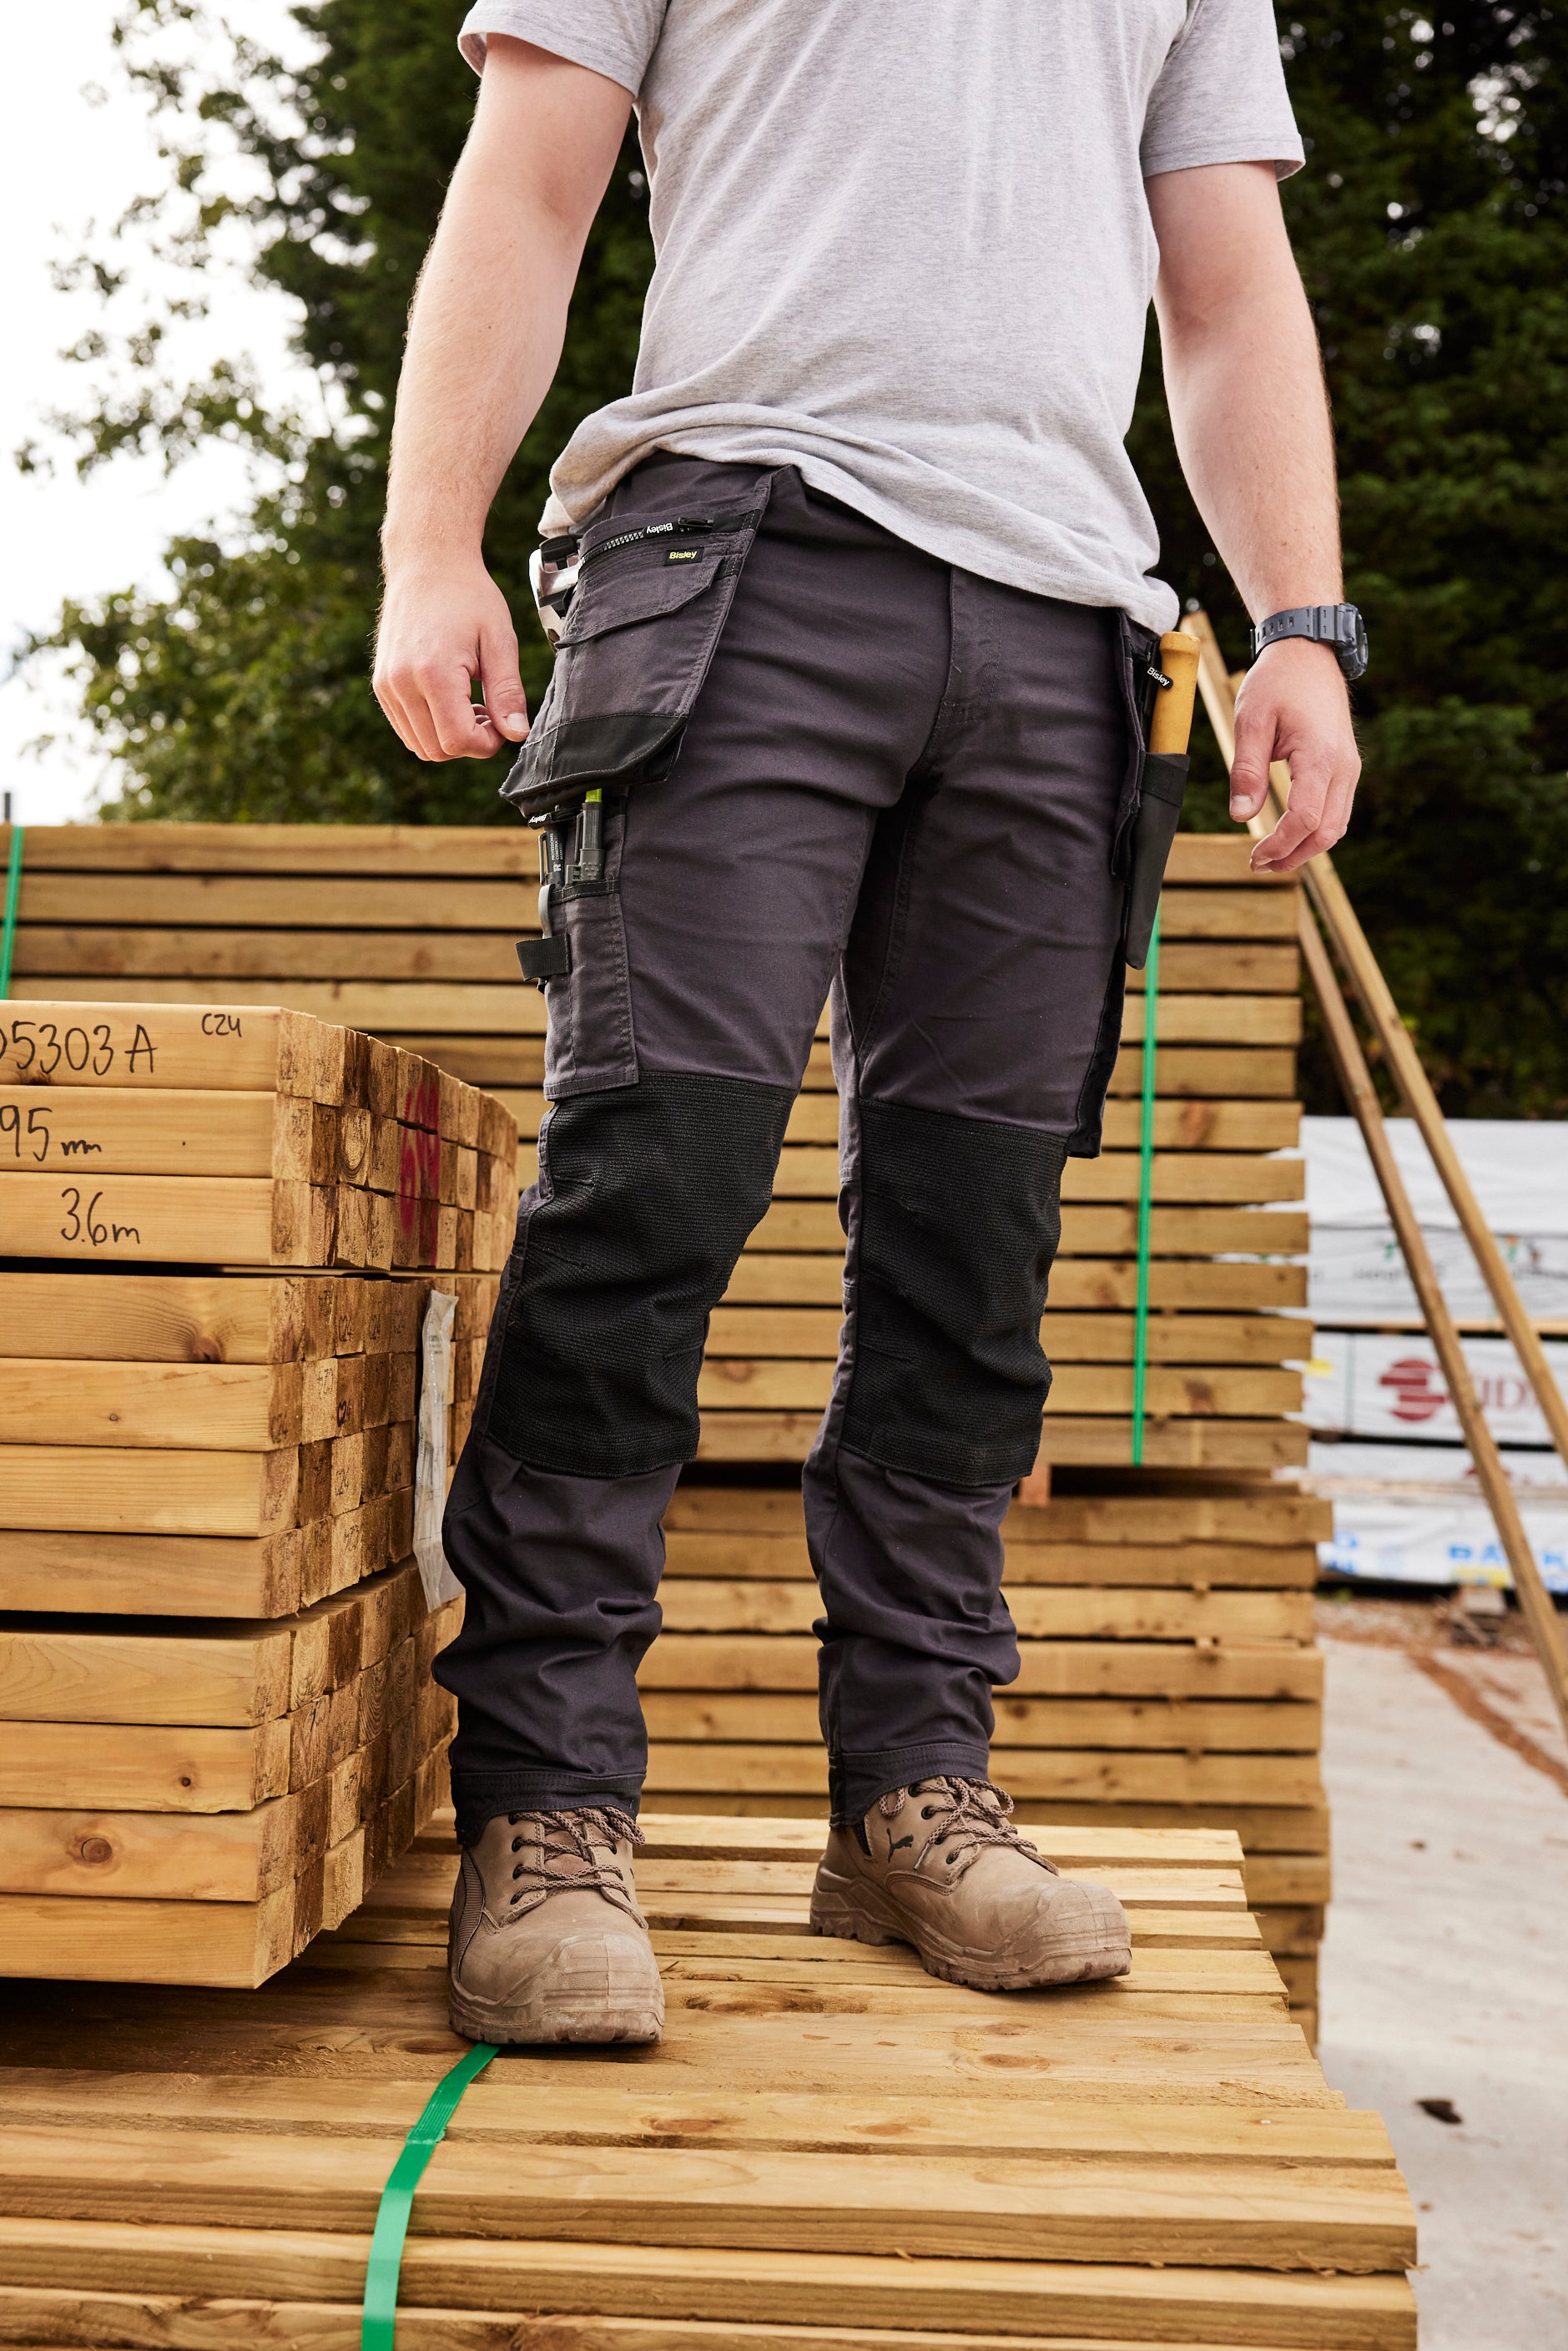 FLX & MOVE™ STRETCH UTILITY CARGO TROUSER WITH HOLSTER TOOL POCKETS